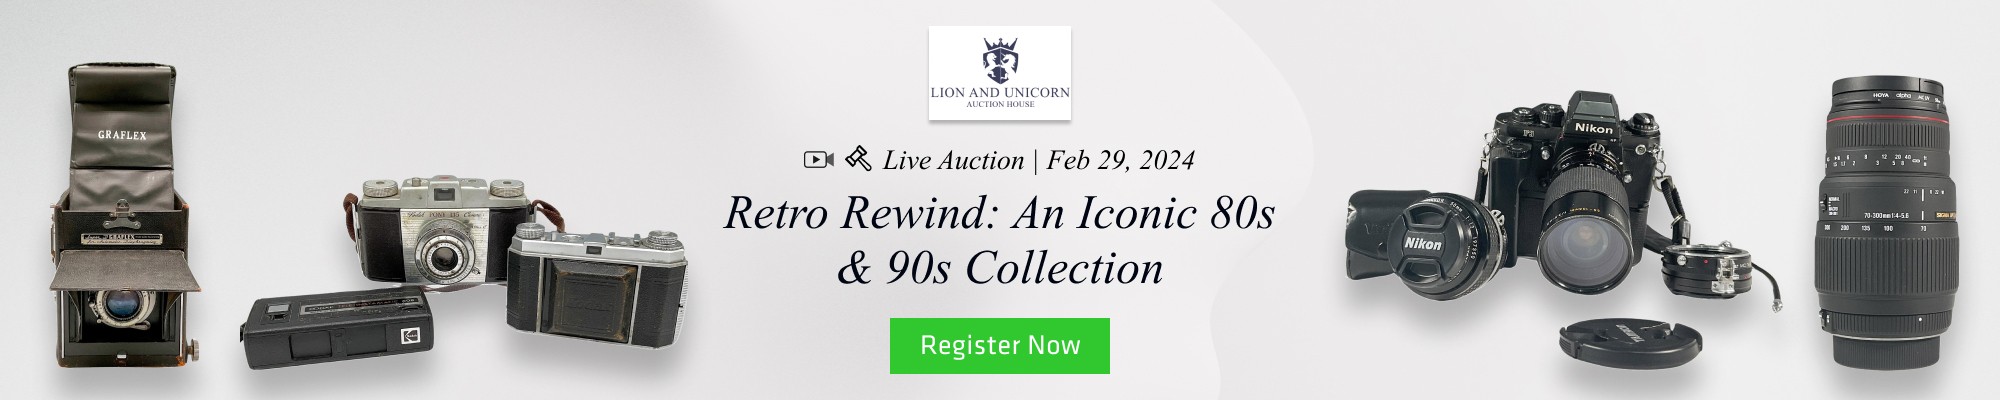 Retro Rewind: An Iconic 80s & 90s Collection